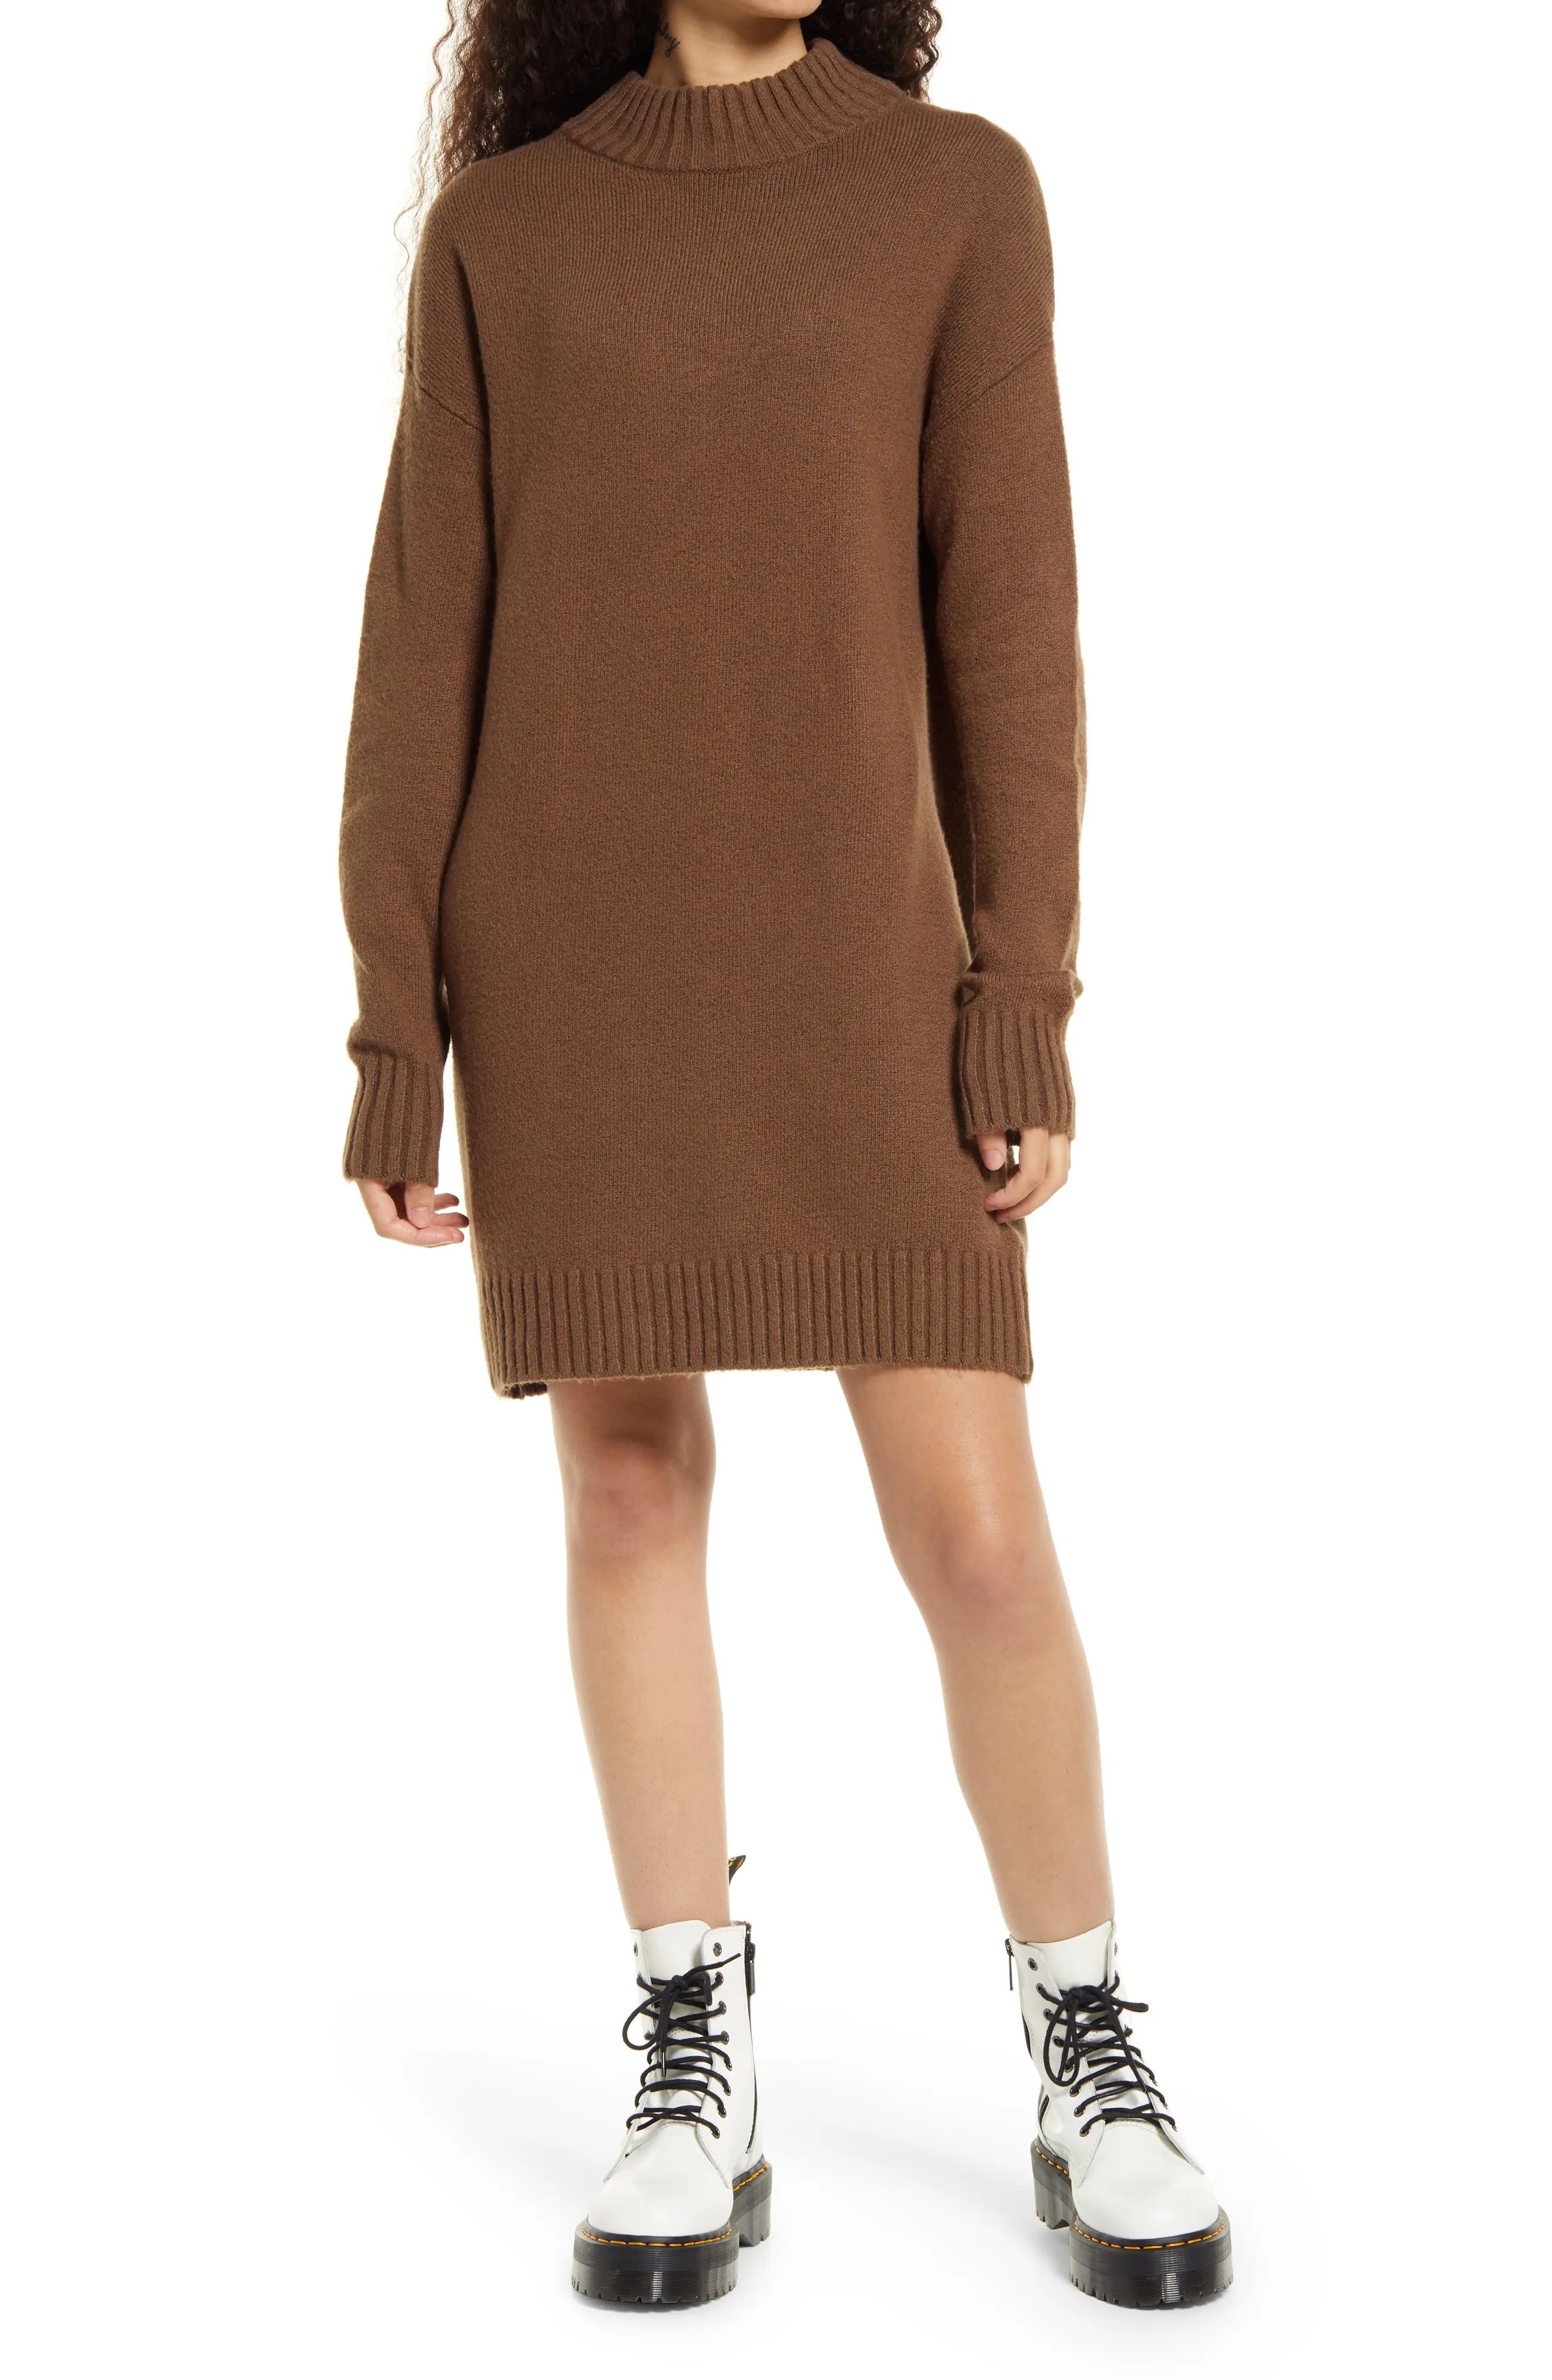 BP. Easy Crewneck Long Sleeve Sweater Dress, Size Small in Brown Earth at Nordstrom | Nordstrom